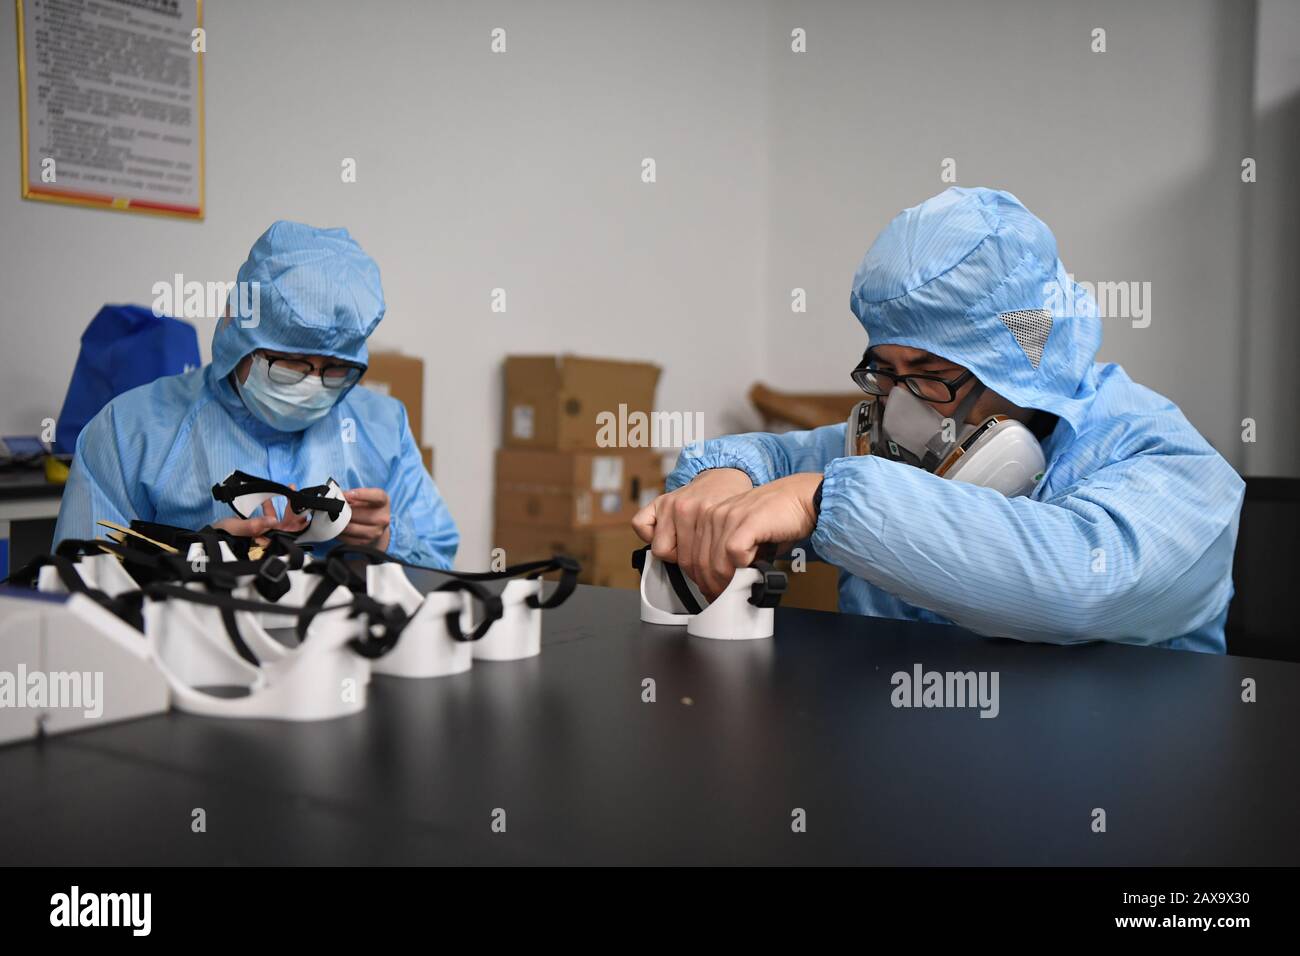 (200211) -- CHANGSHA, Feb. 11, 2020 (Xinhua) -- Workers produce goggles at the additive manufacturing research and application center of Hunan Vanguard Group Co., Ltd. in the economic development zone of Changsha City, central China's Hunan Province, Feb. 11, 2020. The company has been producing goggles for medical use with more than 50 3D printers working day and night recently. The first batch of 500 pairs of goggles it produced have been sent to Changsha and Huaihua to aid the novel coronavirus control efforts there. (Xinhua/Xue Yuge) Stock Photo